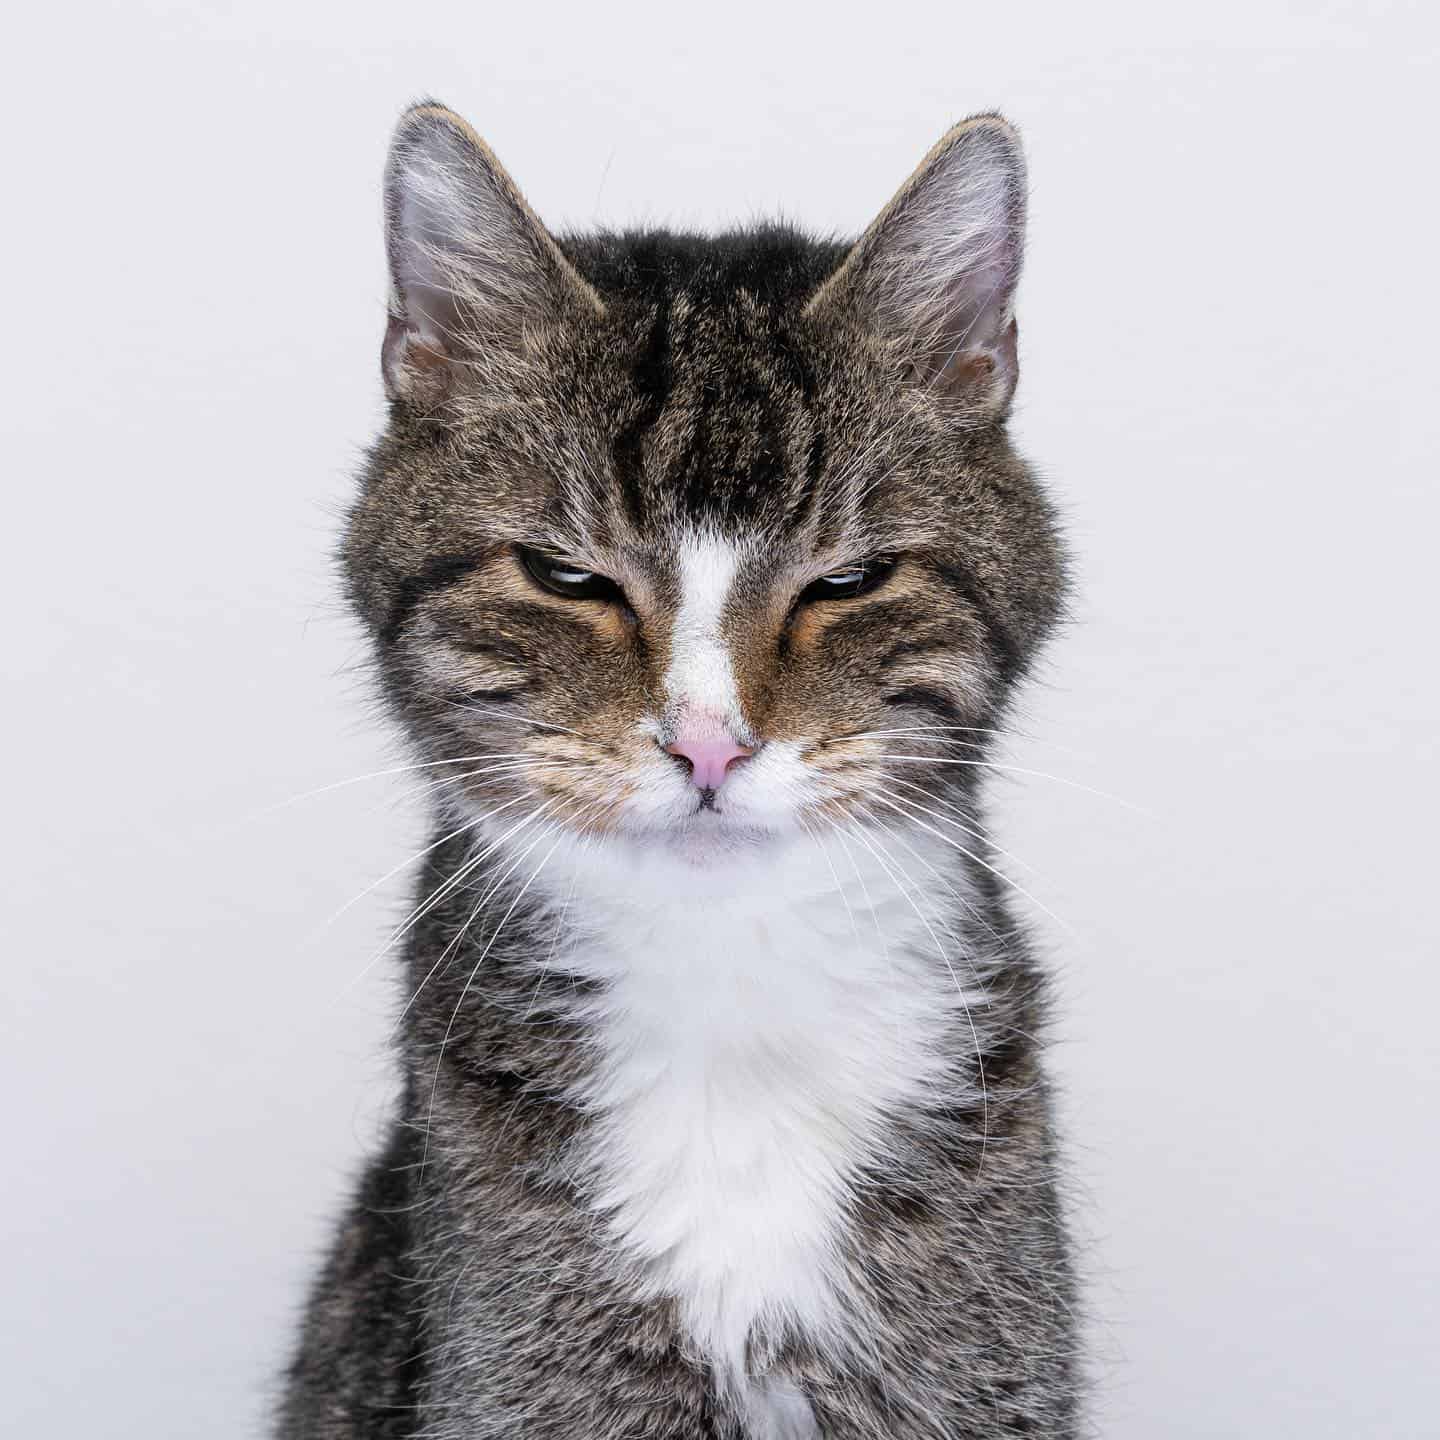 photo of an angry tabby cat